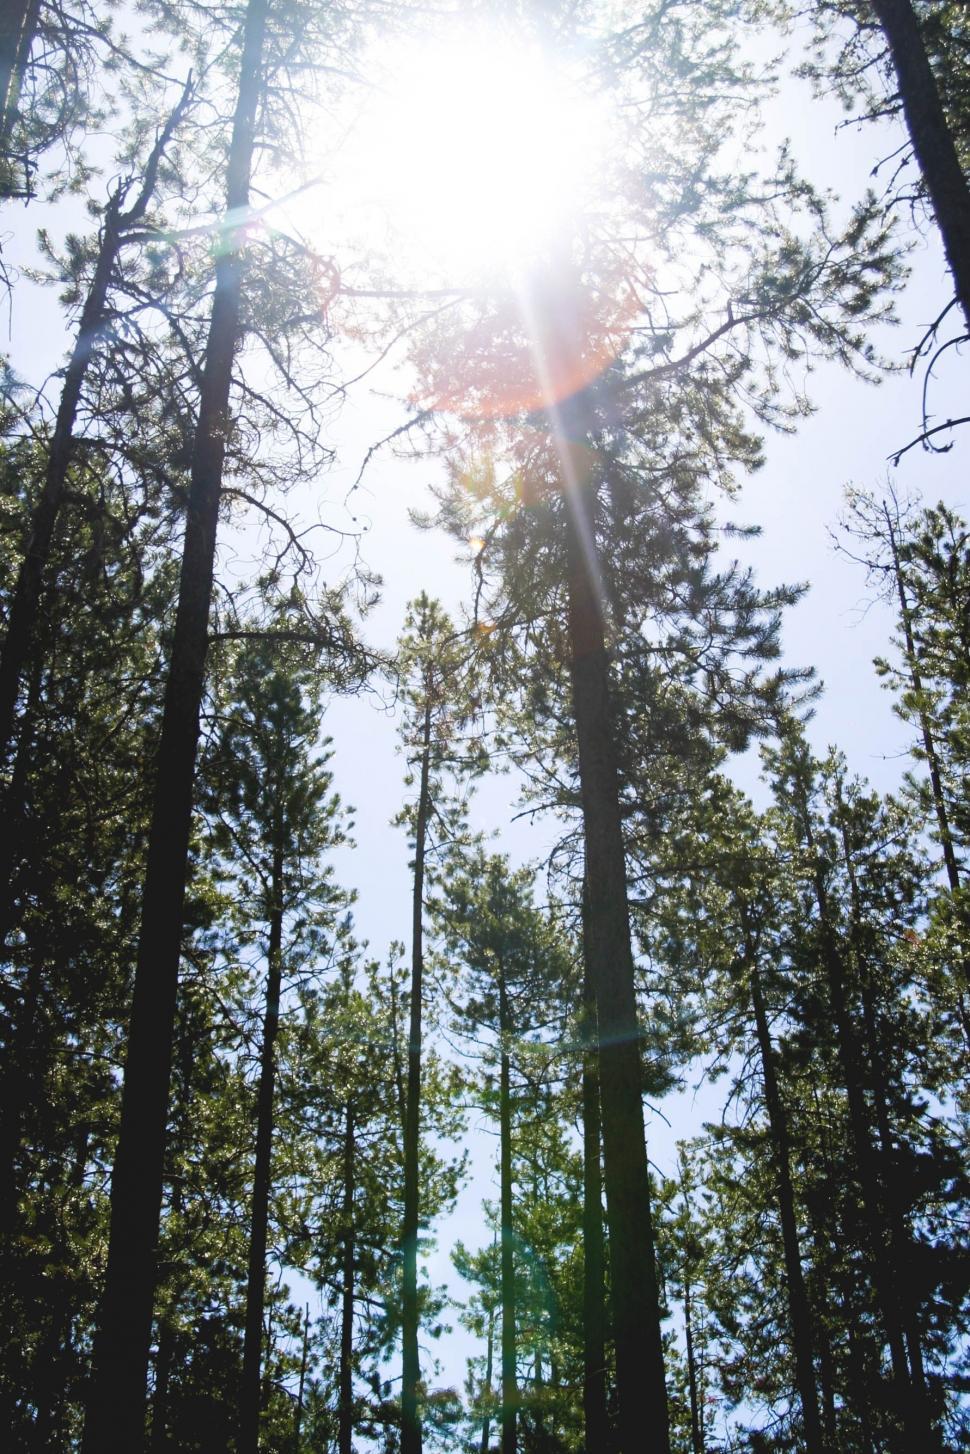 Free Image of Sun Shining Through Trees in Forest 